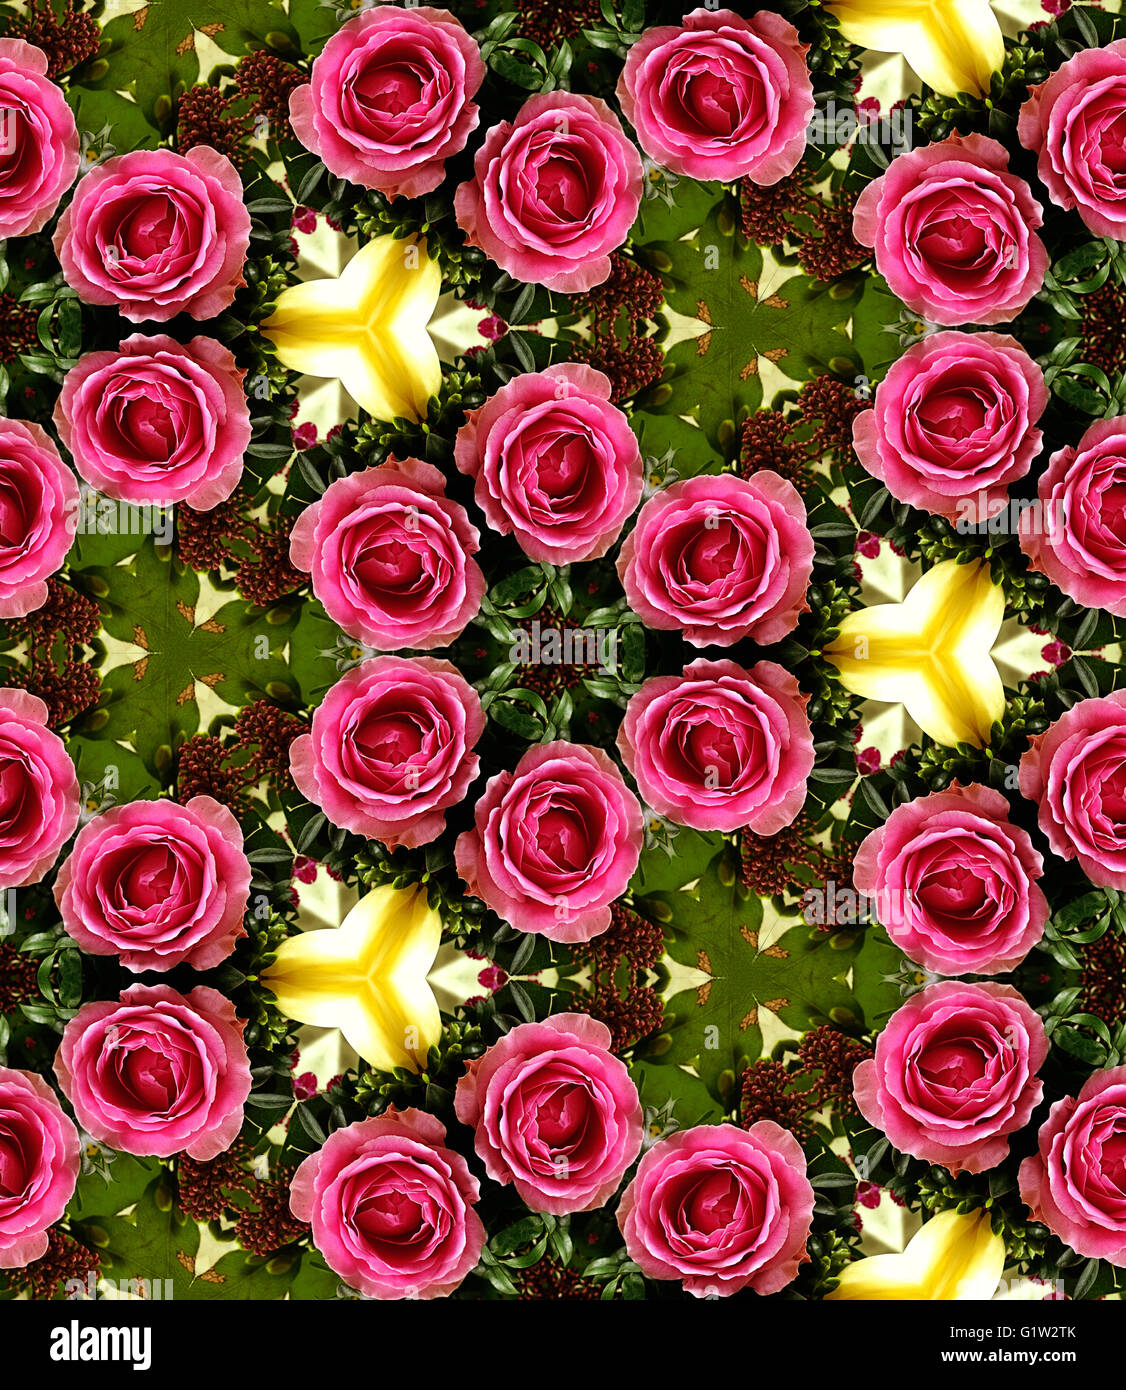 HD seamless texture, crown of pink roses with kaleidoscopic effect Stock Photo